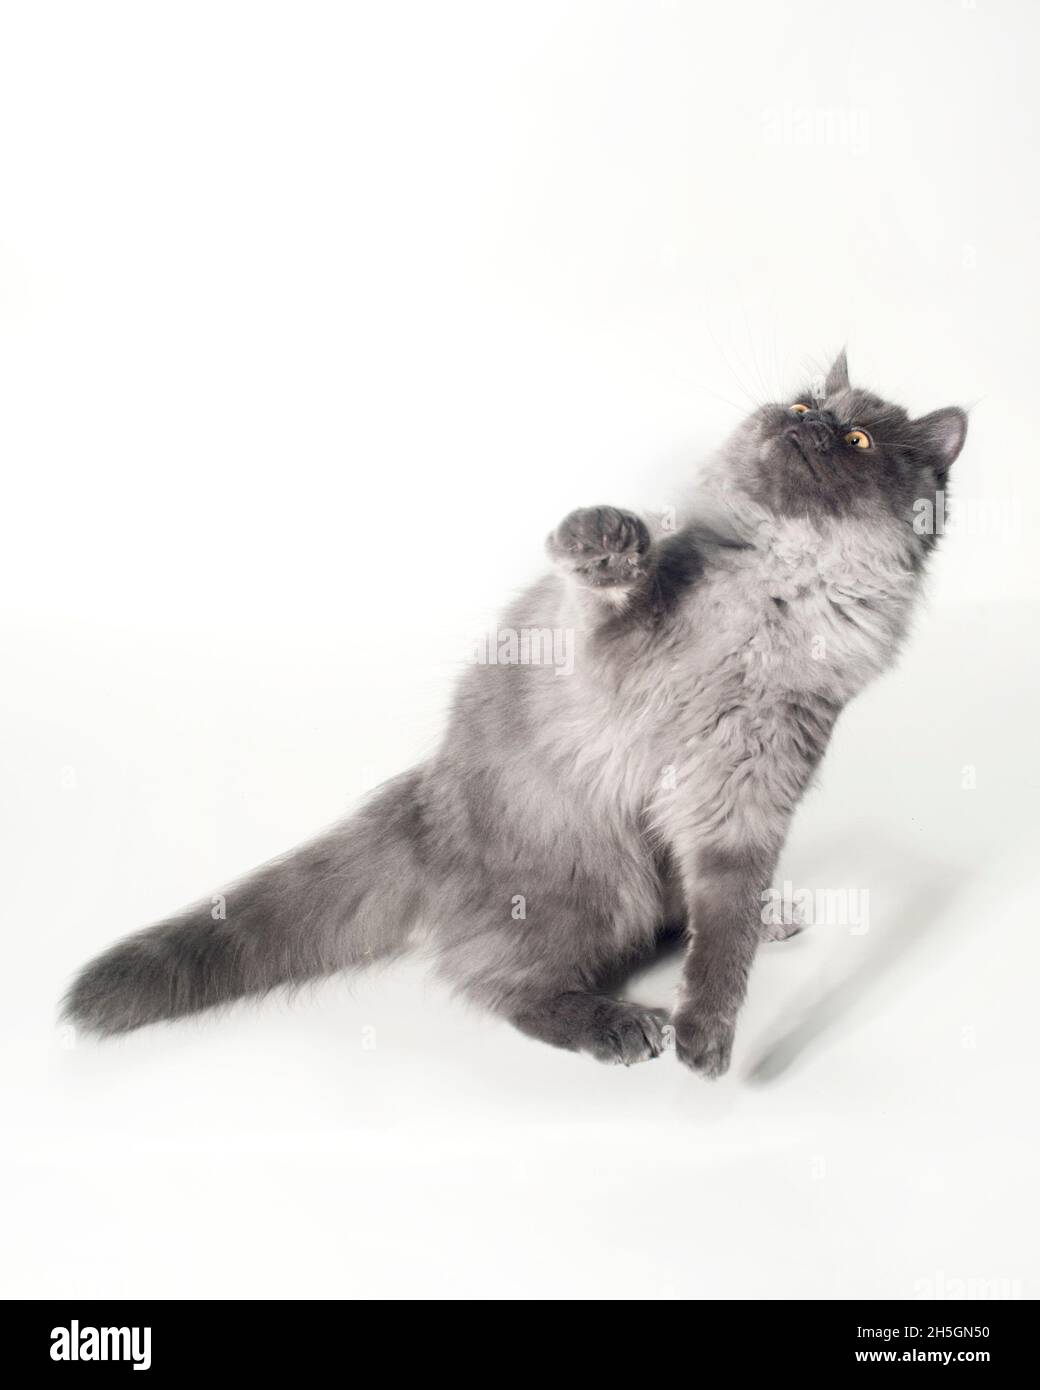 Cute playing grey ragamuffin cat twisting and looking up. Stock Photo